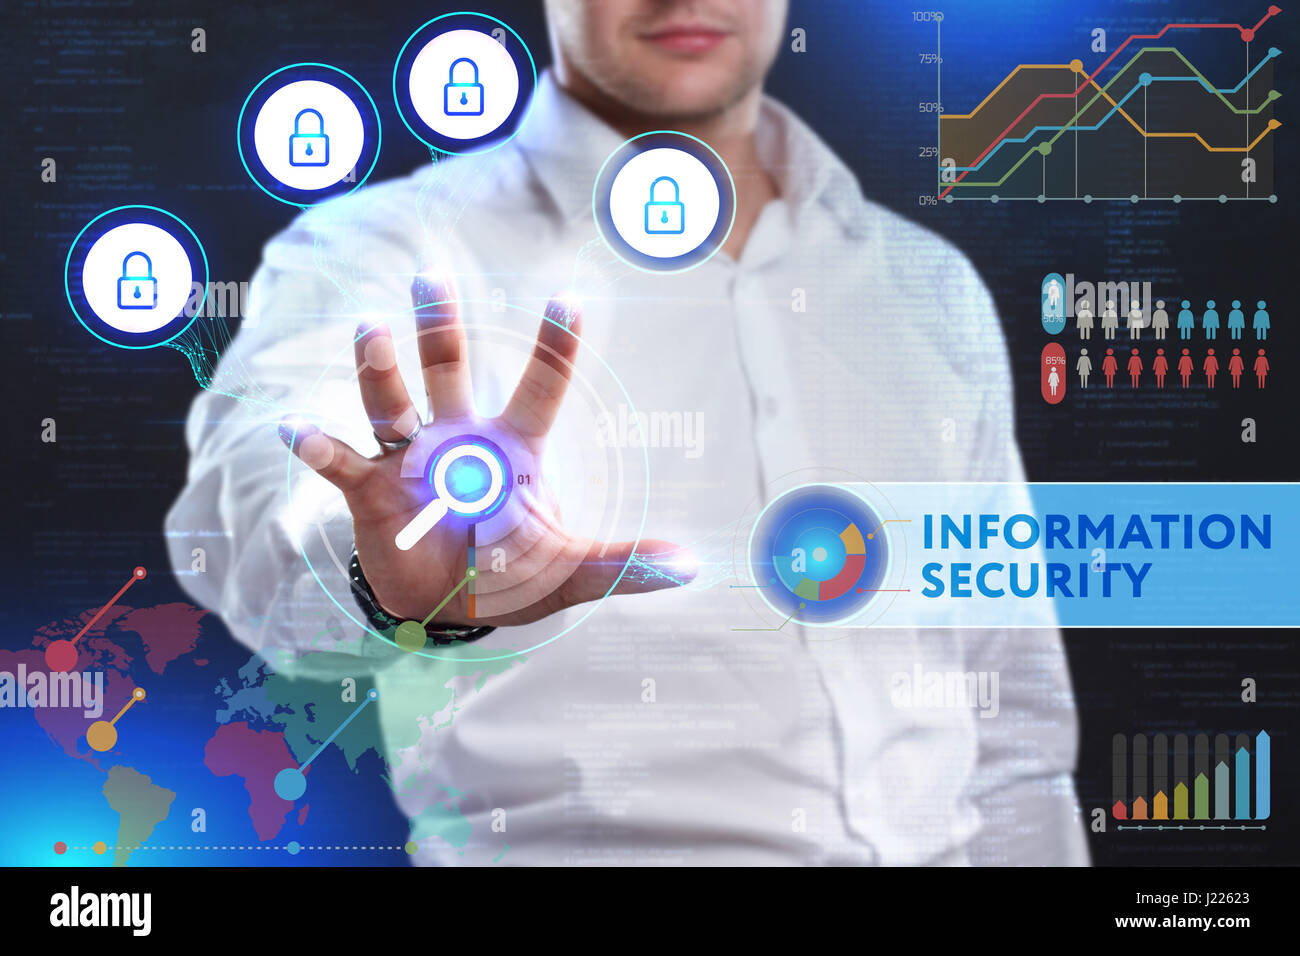 Concept of business security, safety of information from virus, crime and attack. Internet secure system. Protection system. Information security Stock Photo